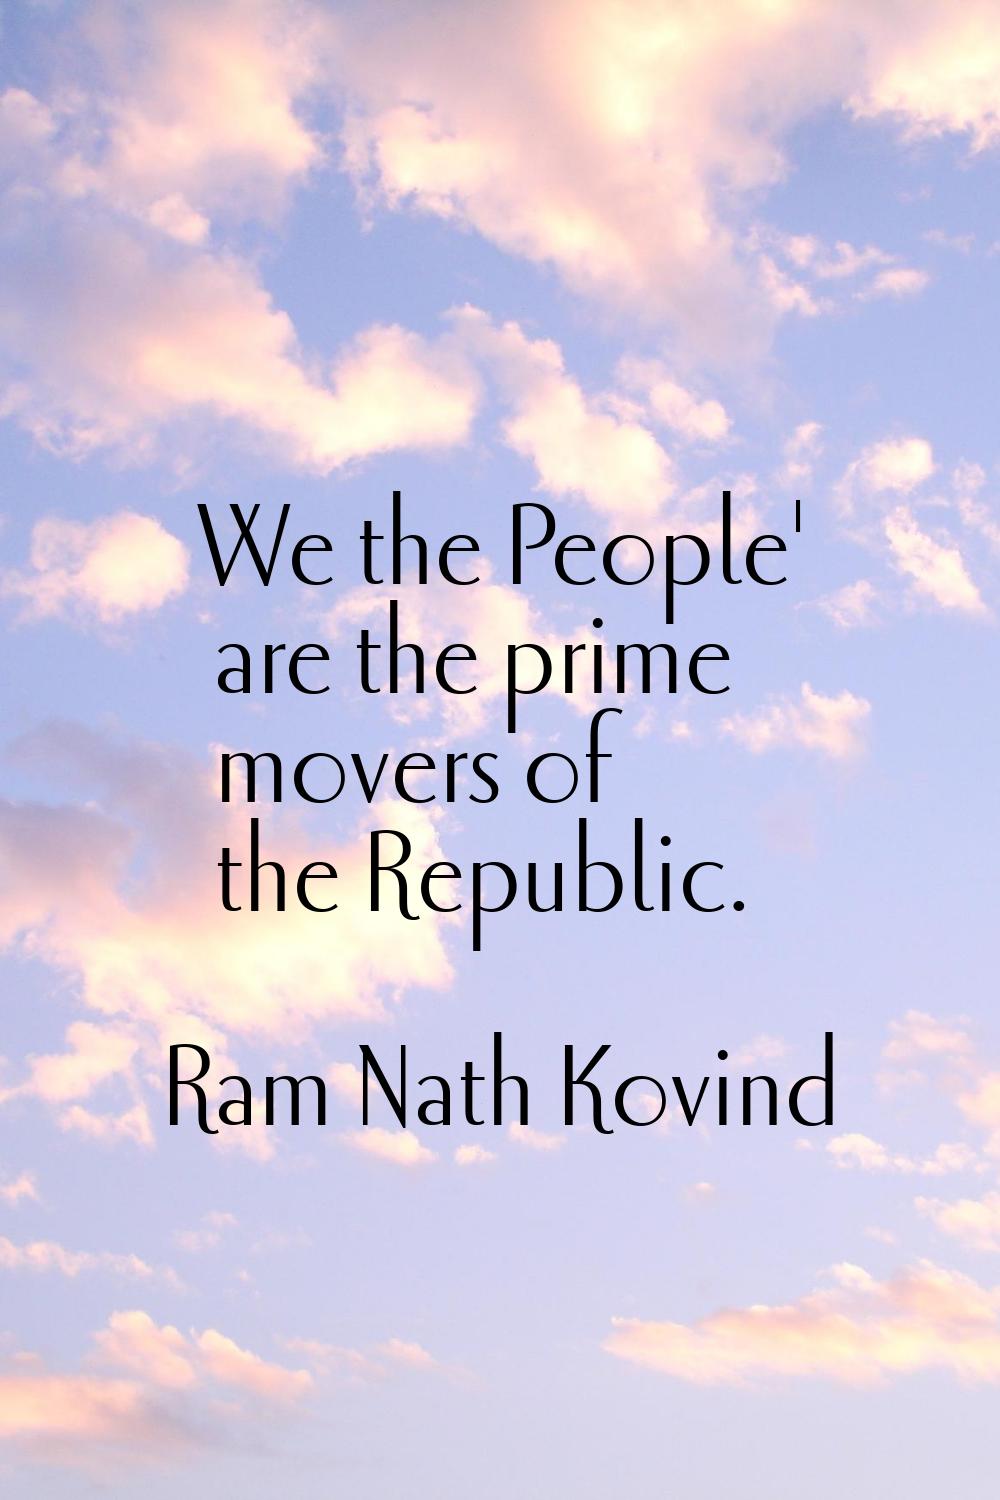 We the People' are the prime movers of the Republic.